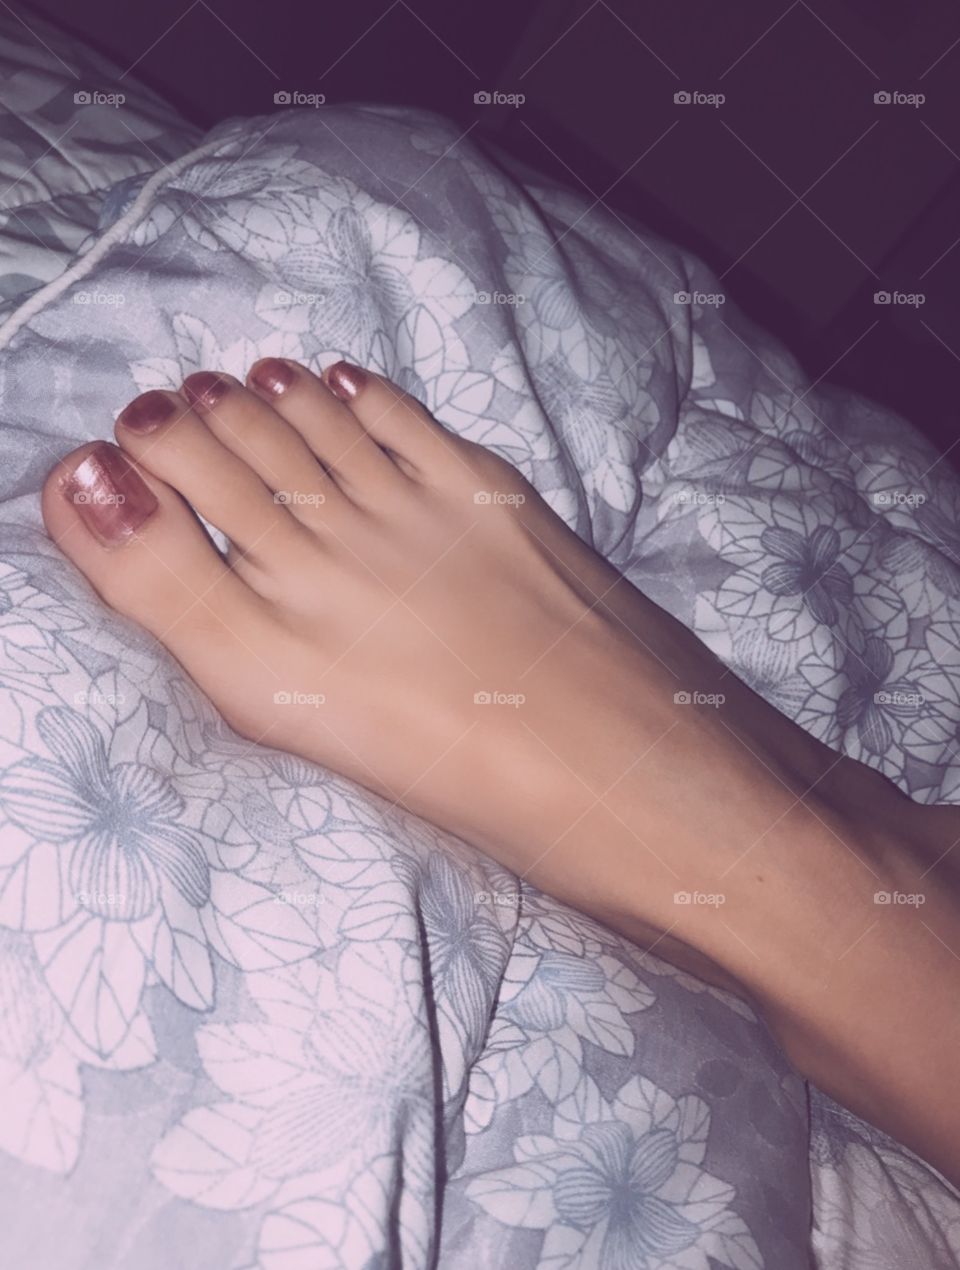 Photogenic foot taken on my bed ;)